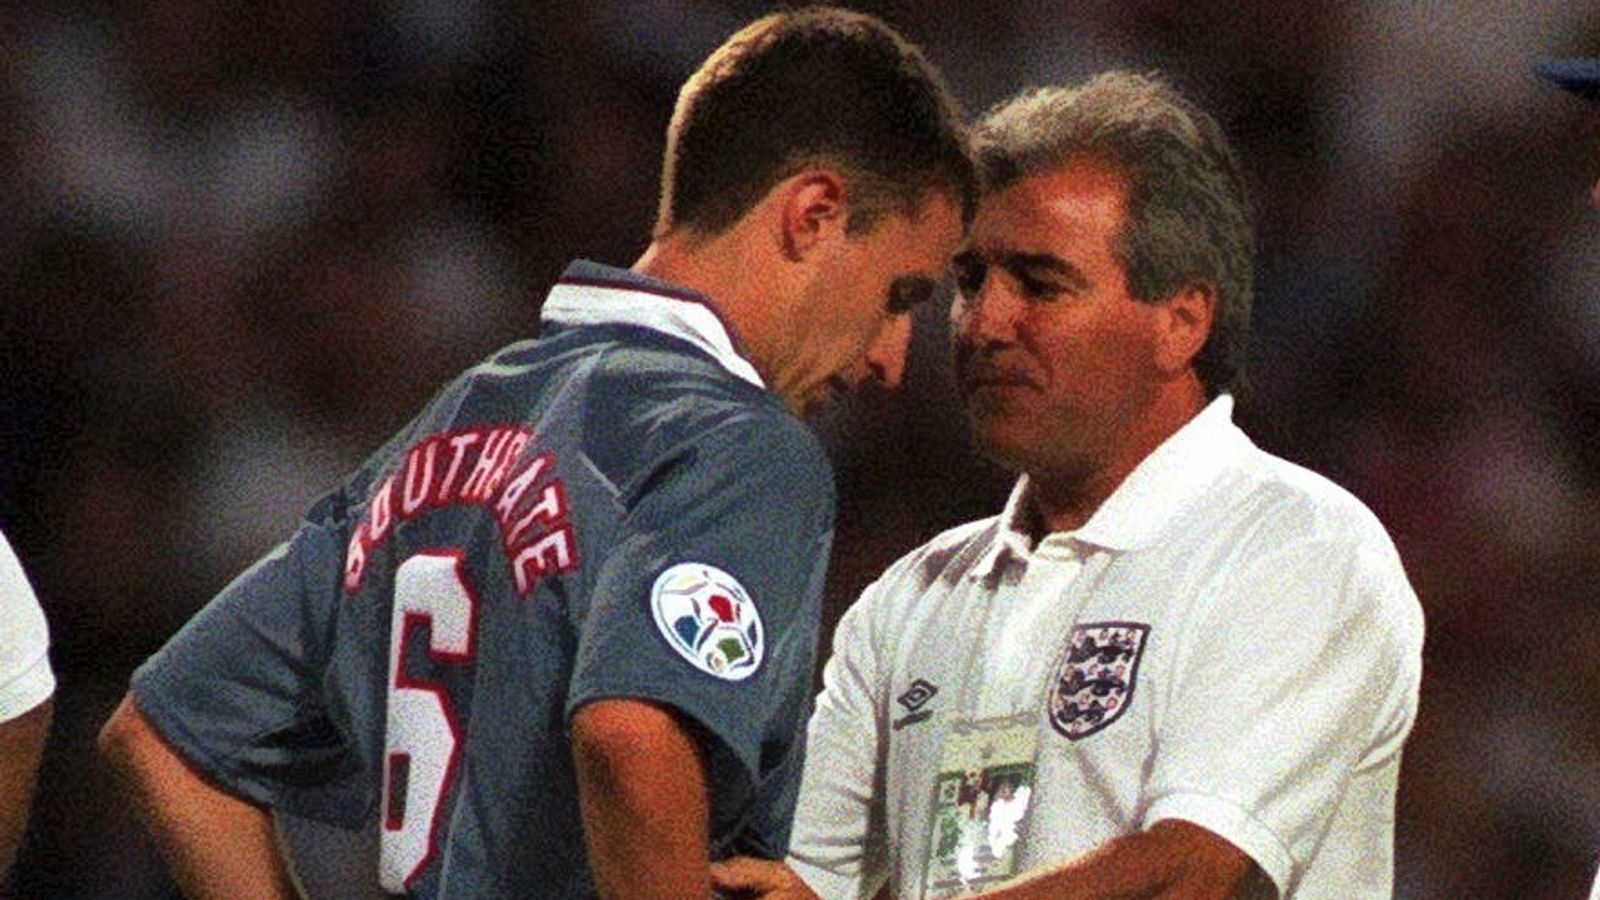 Terry Venables hailed one of England's greatest managers as stars pay tribute